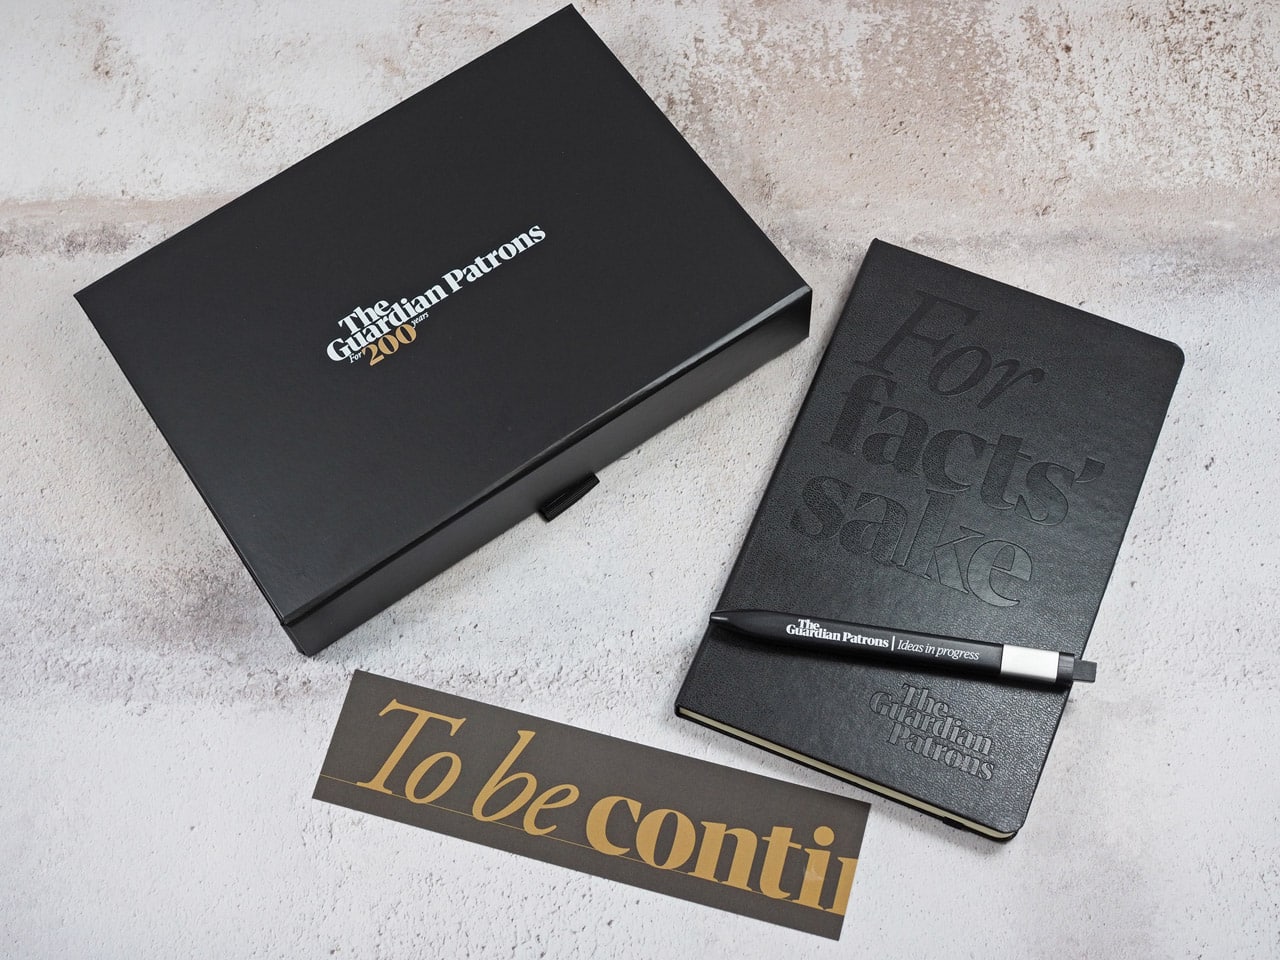 A branded moleskine pen sits on top of a debossed moleskine notebook beside a custom bookmark as part of the patron gift sets.